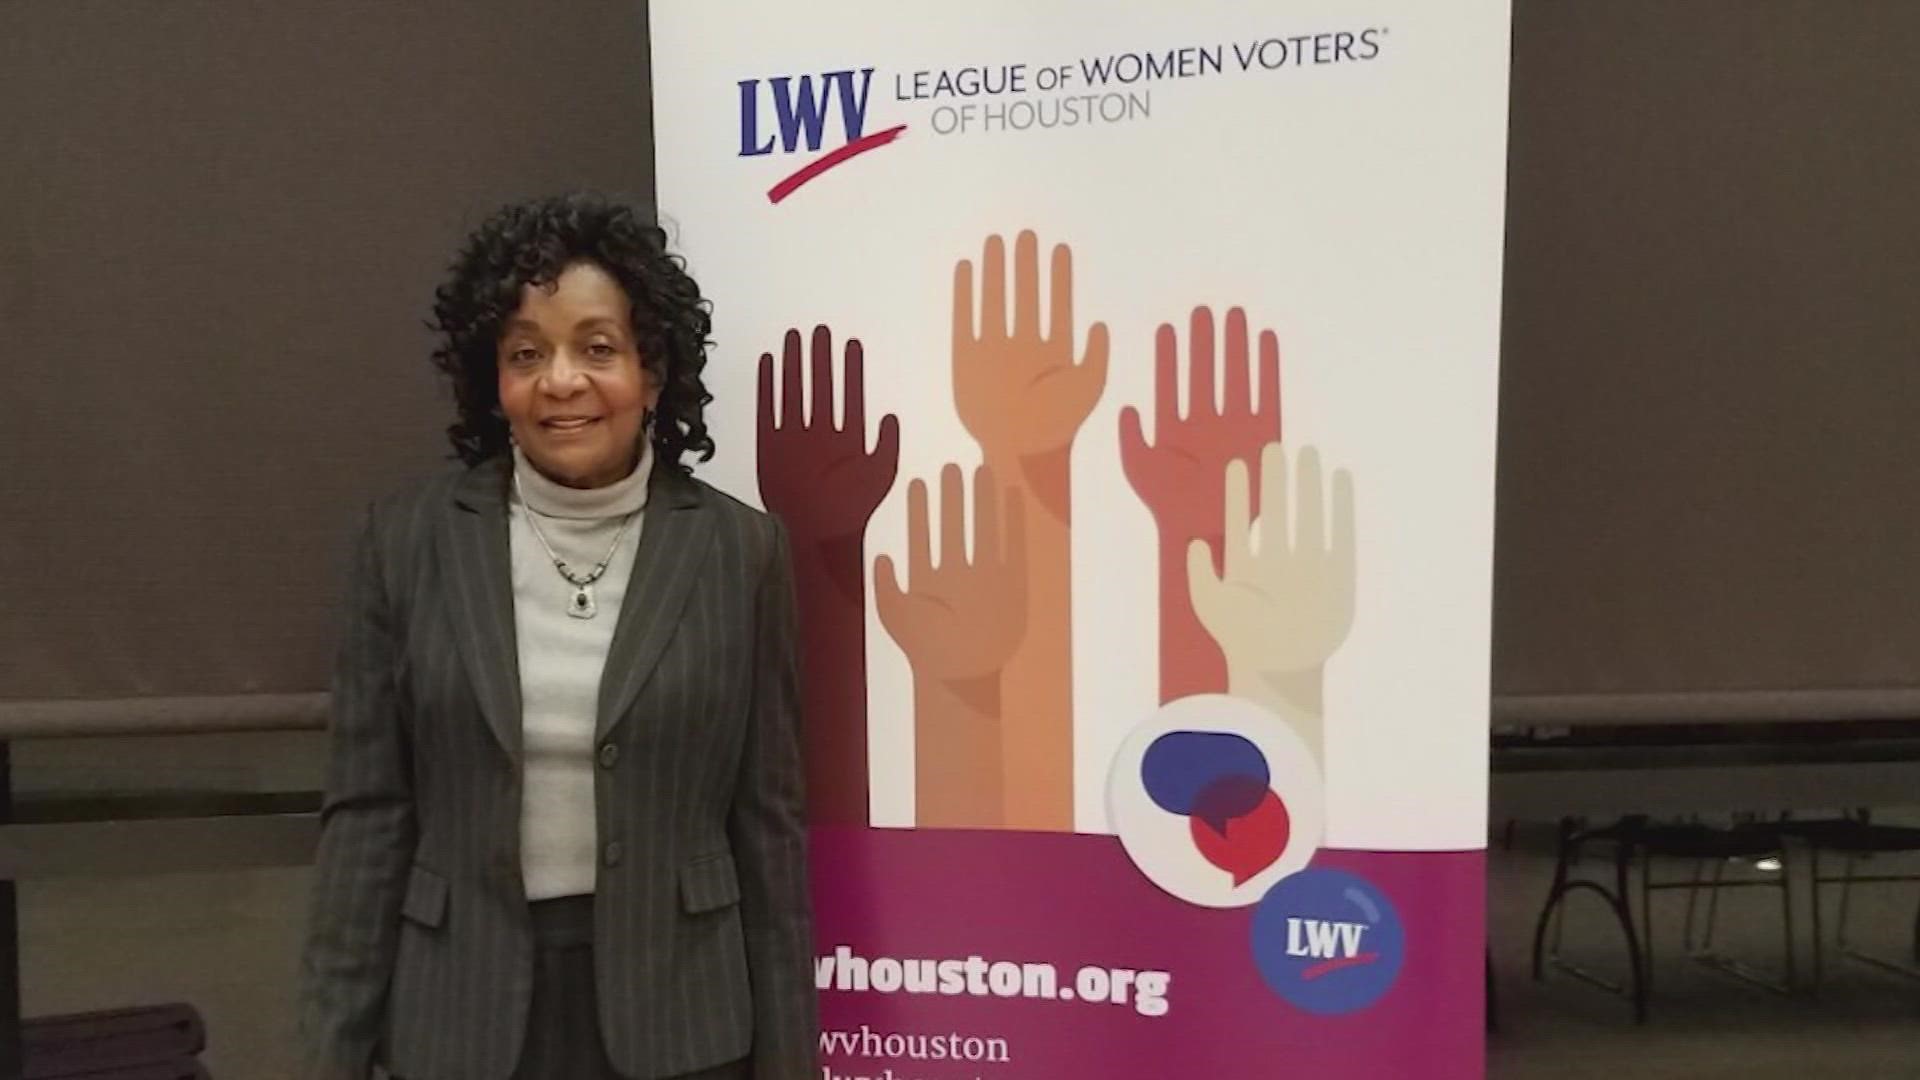 Since 1982, more women than men are voting but Annie Johnson-Benifield said there's still more work to be done.